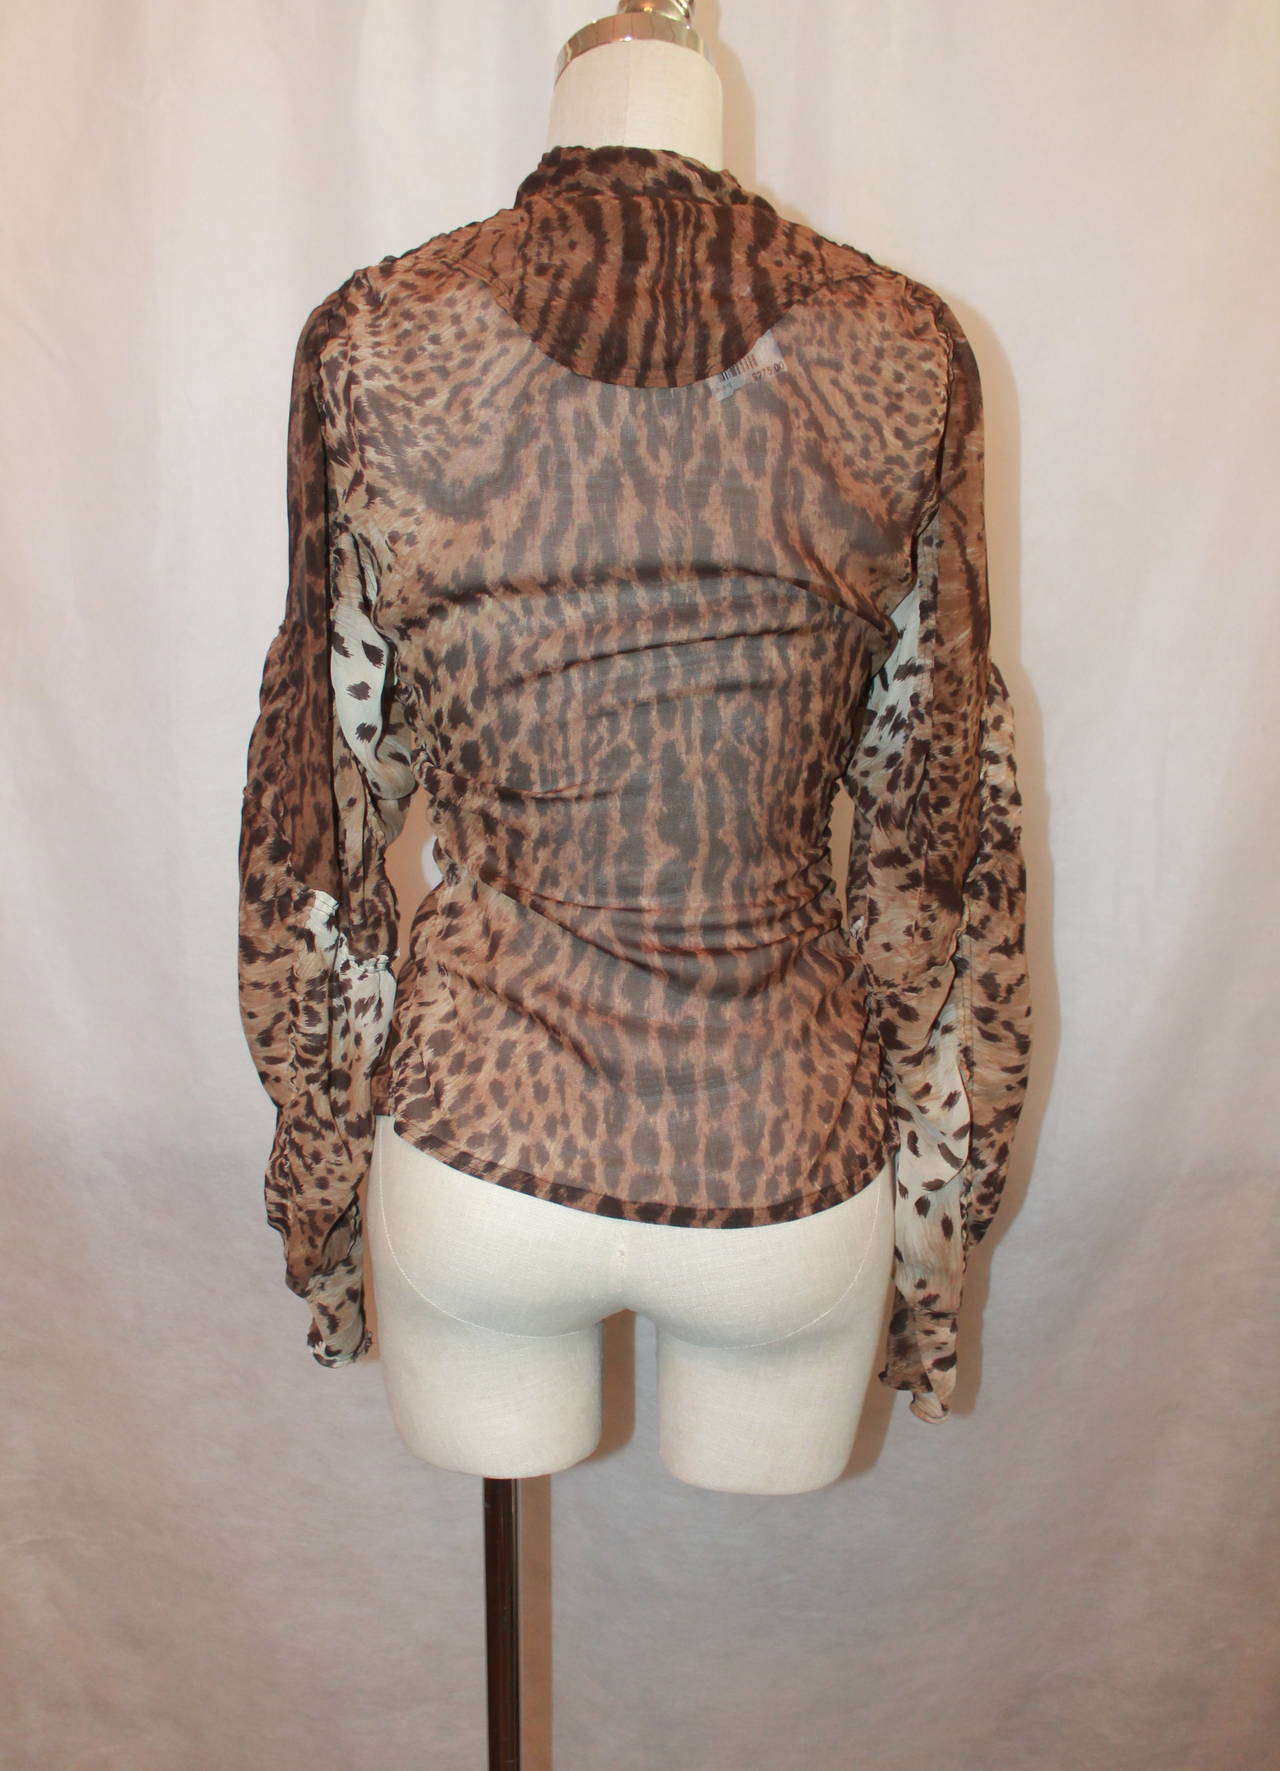 YSL Leopard Printed Sheer Blouse with Gatherings - S 1